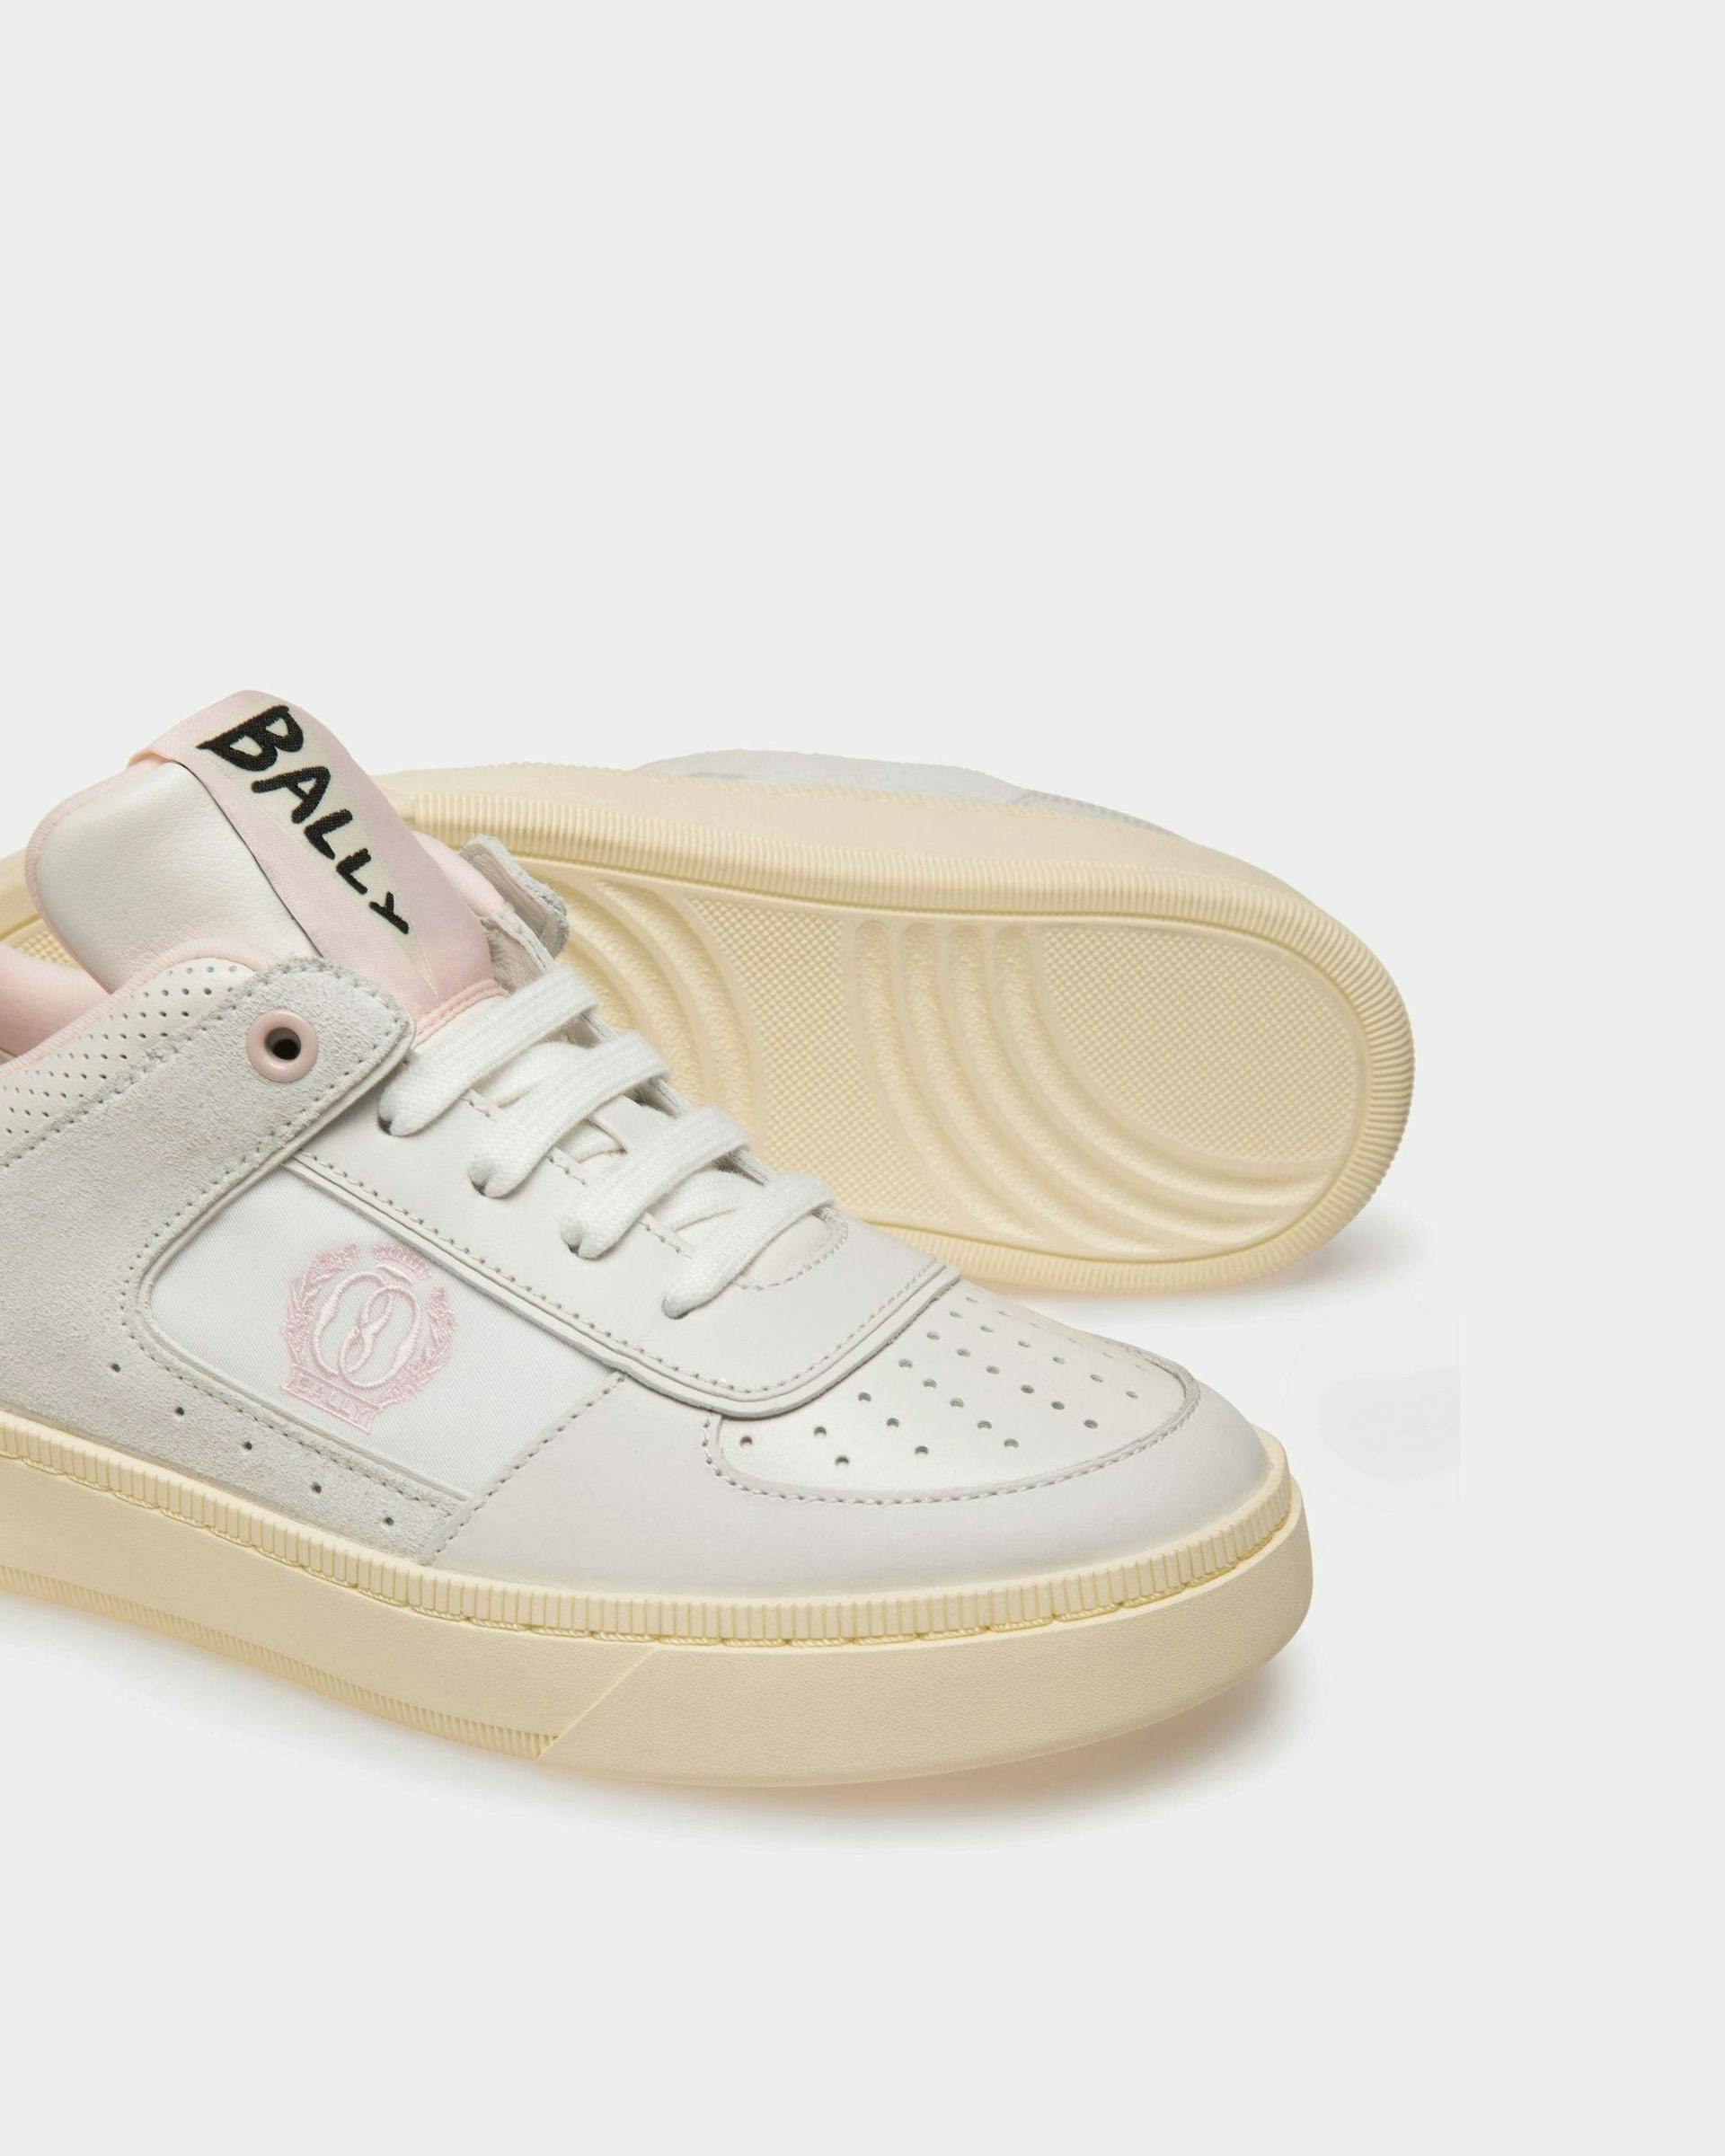 Women's Raise Sneakers In White And Pink Leather | Bally | Still Life Below